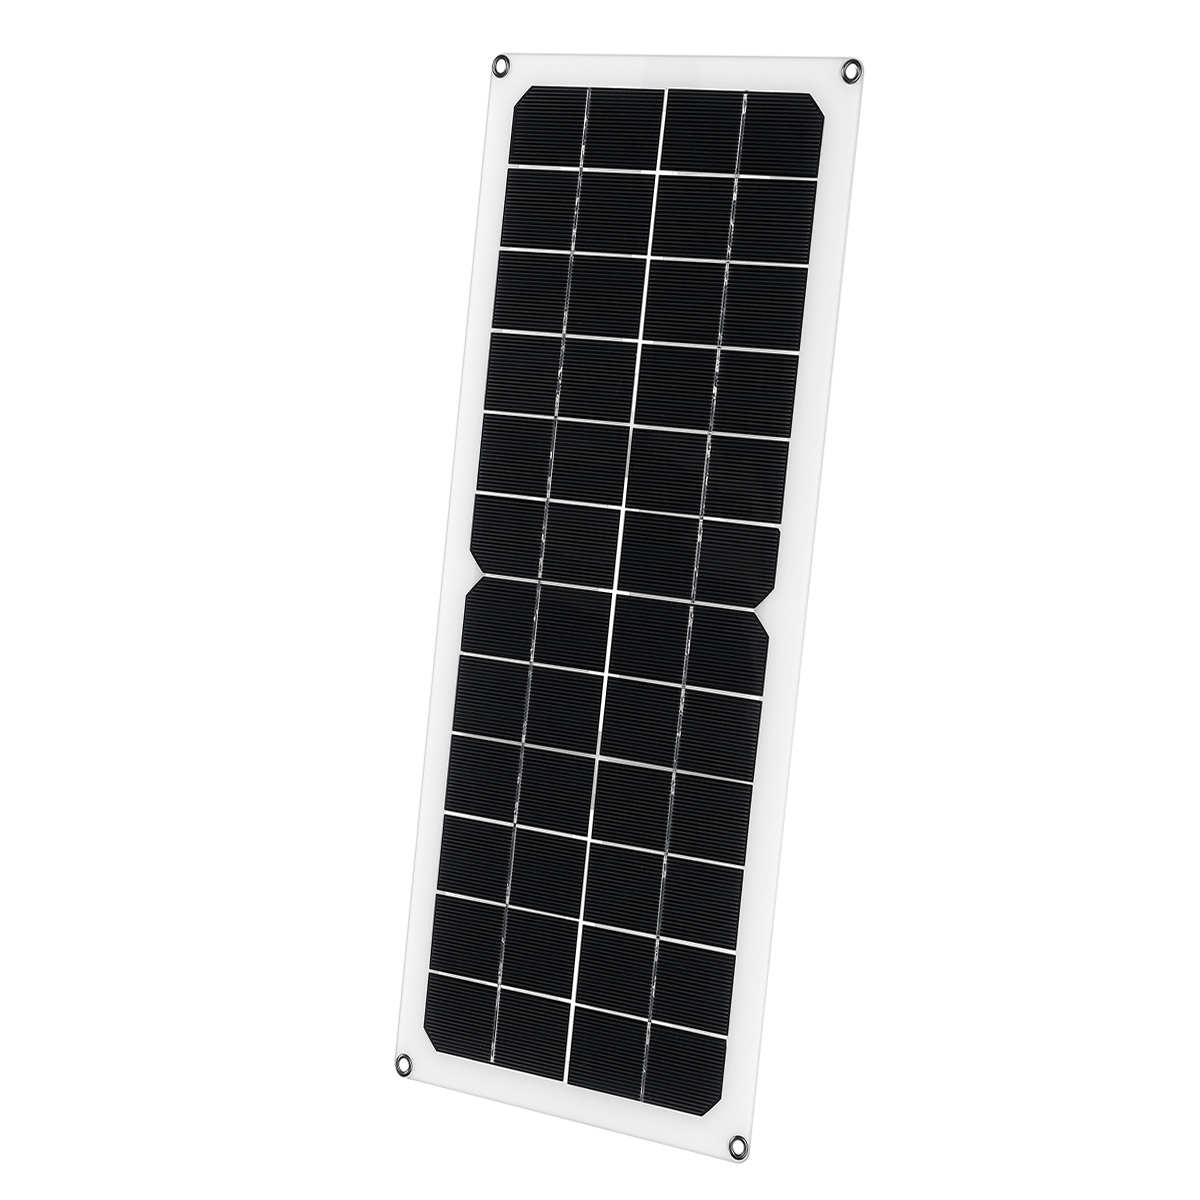 30W-12V-Solar-Panel-DC-5V-USB-Power-Battery-Charger-Portable-Outdoor-Camping-Travel-1856152-9